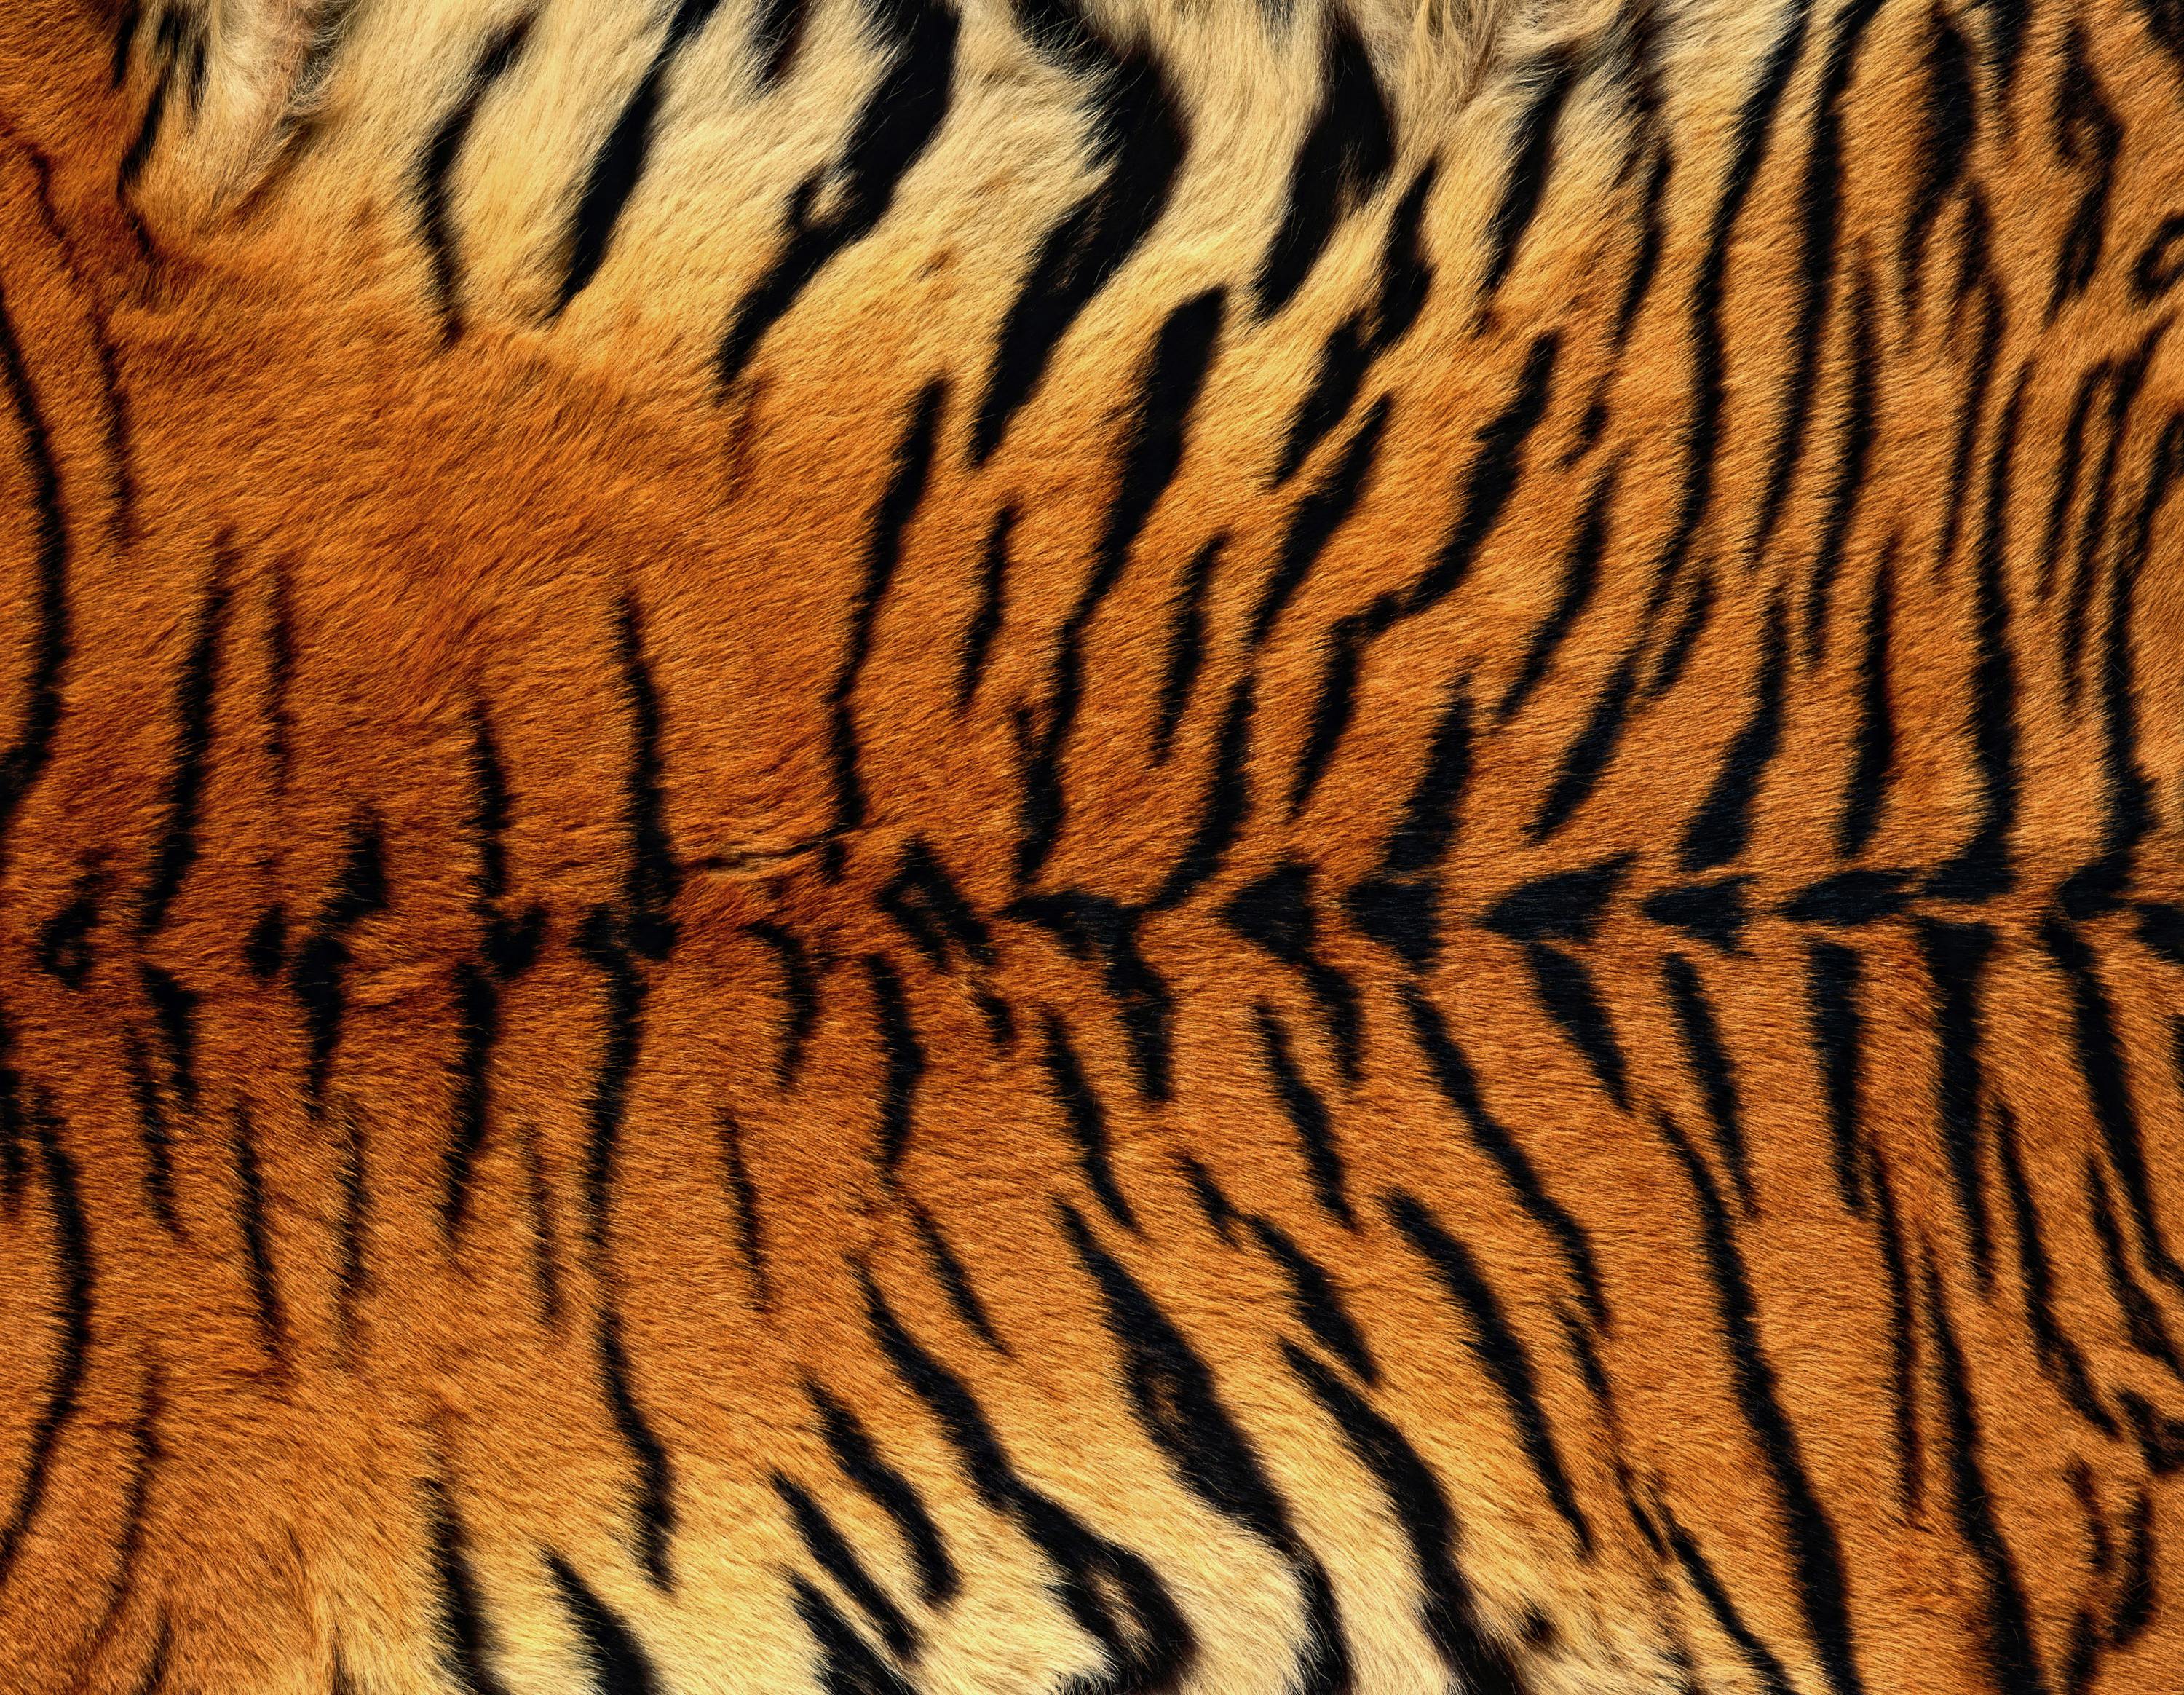 Tiger Skin Background Gallery Yopriceville High Quality